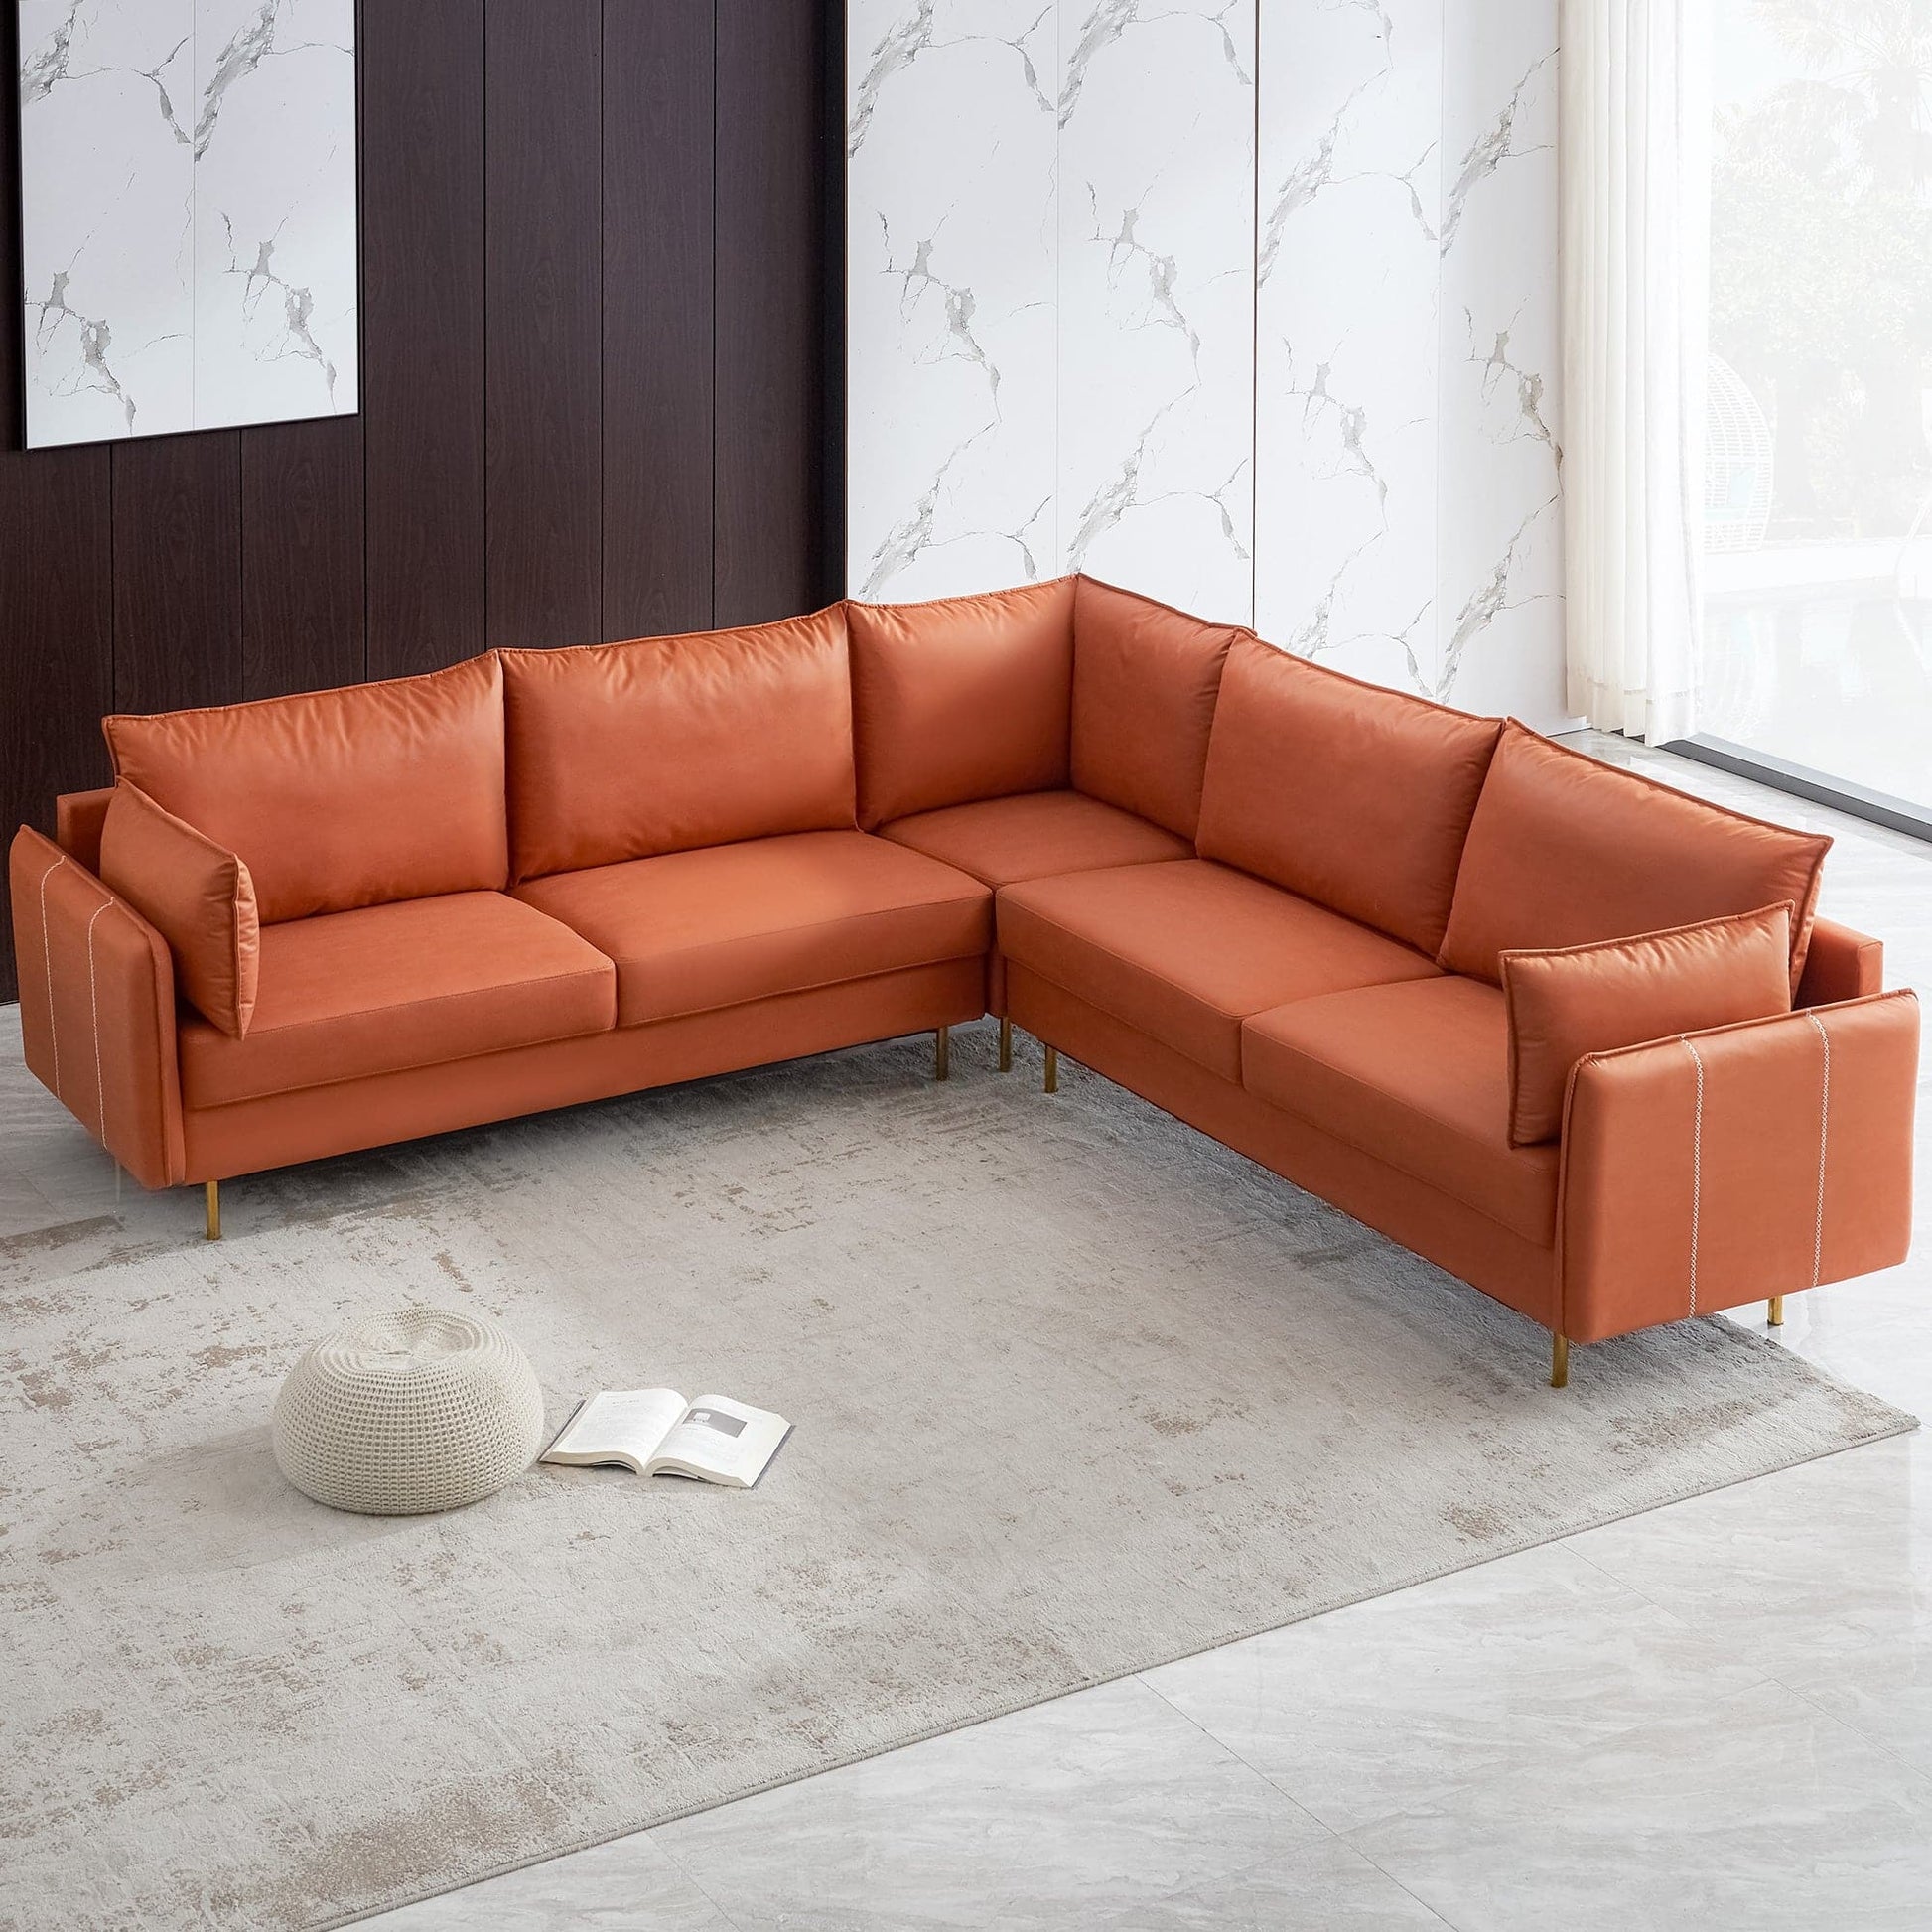 TFC&H Co. L-shaped Corner Sectional Technical leather Sofa - Orange- Ships from The US - sectional at TFC&H Co.